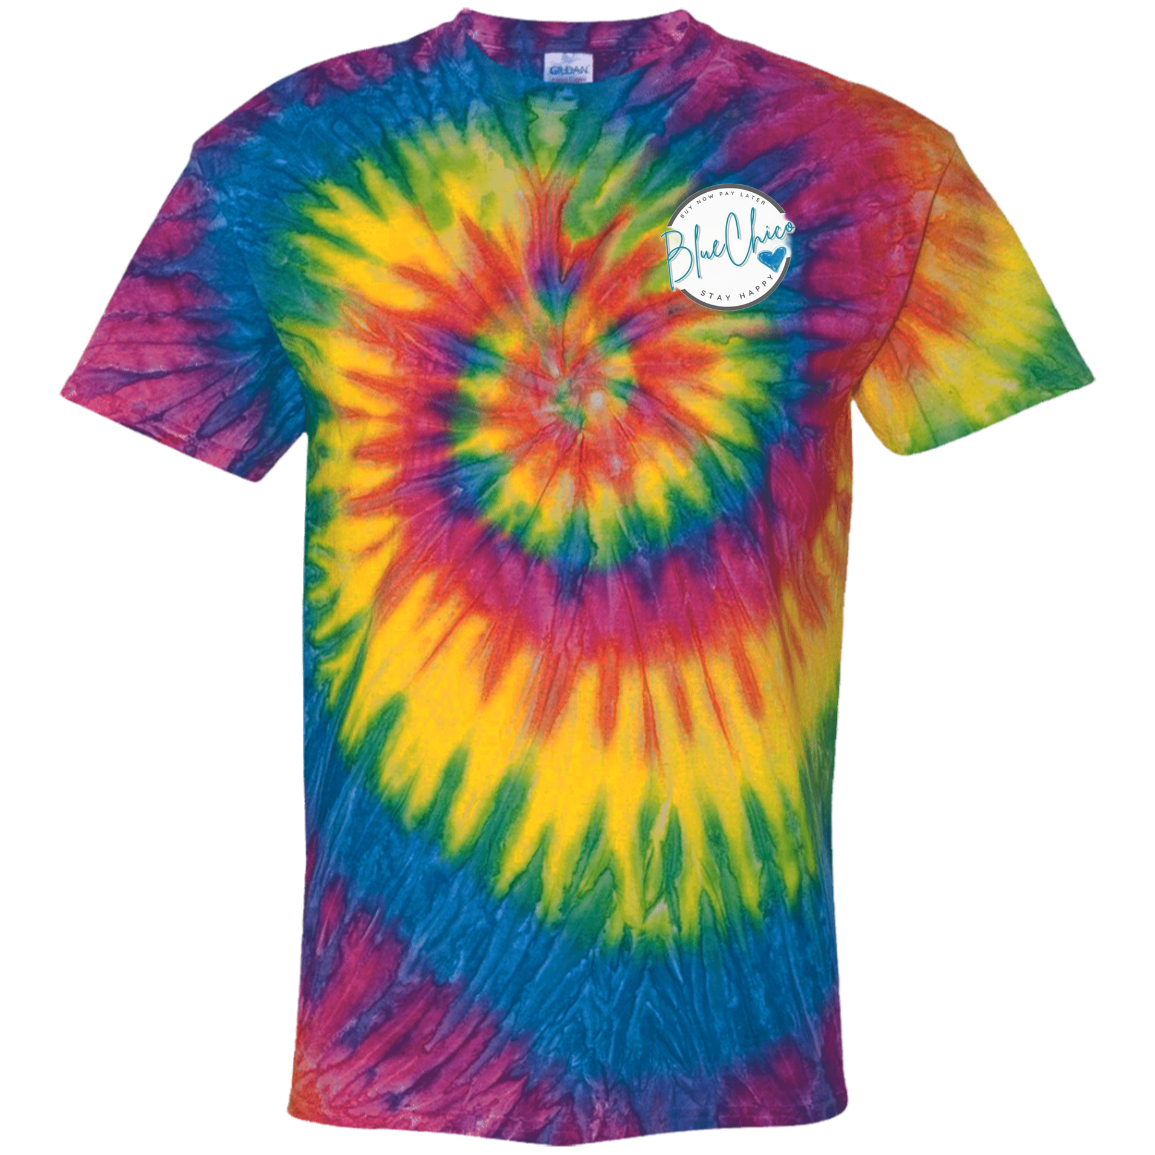 Blue Chico Youth Tie Dye T-Shirt